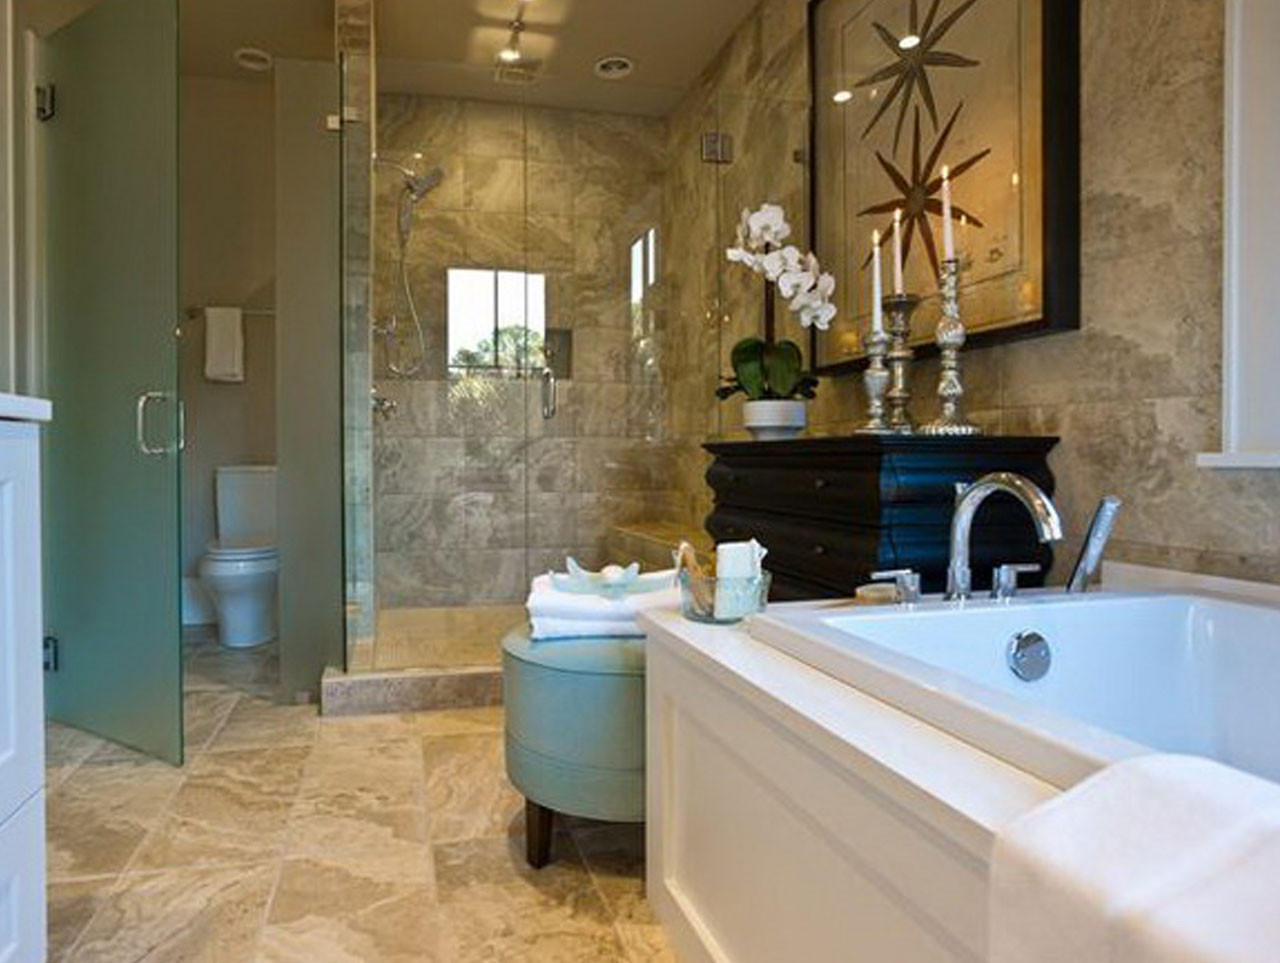 Master Bathroom Layouts
 Why You Should Planning Master Bathroom Layouts MidCityEast